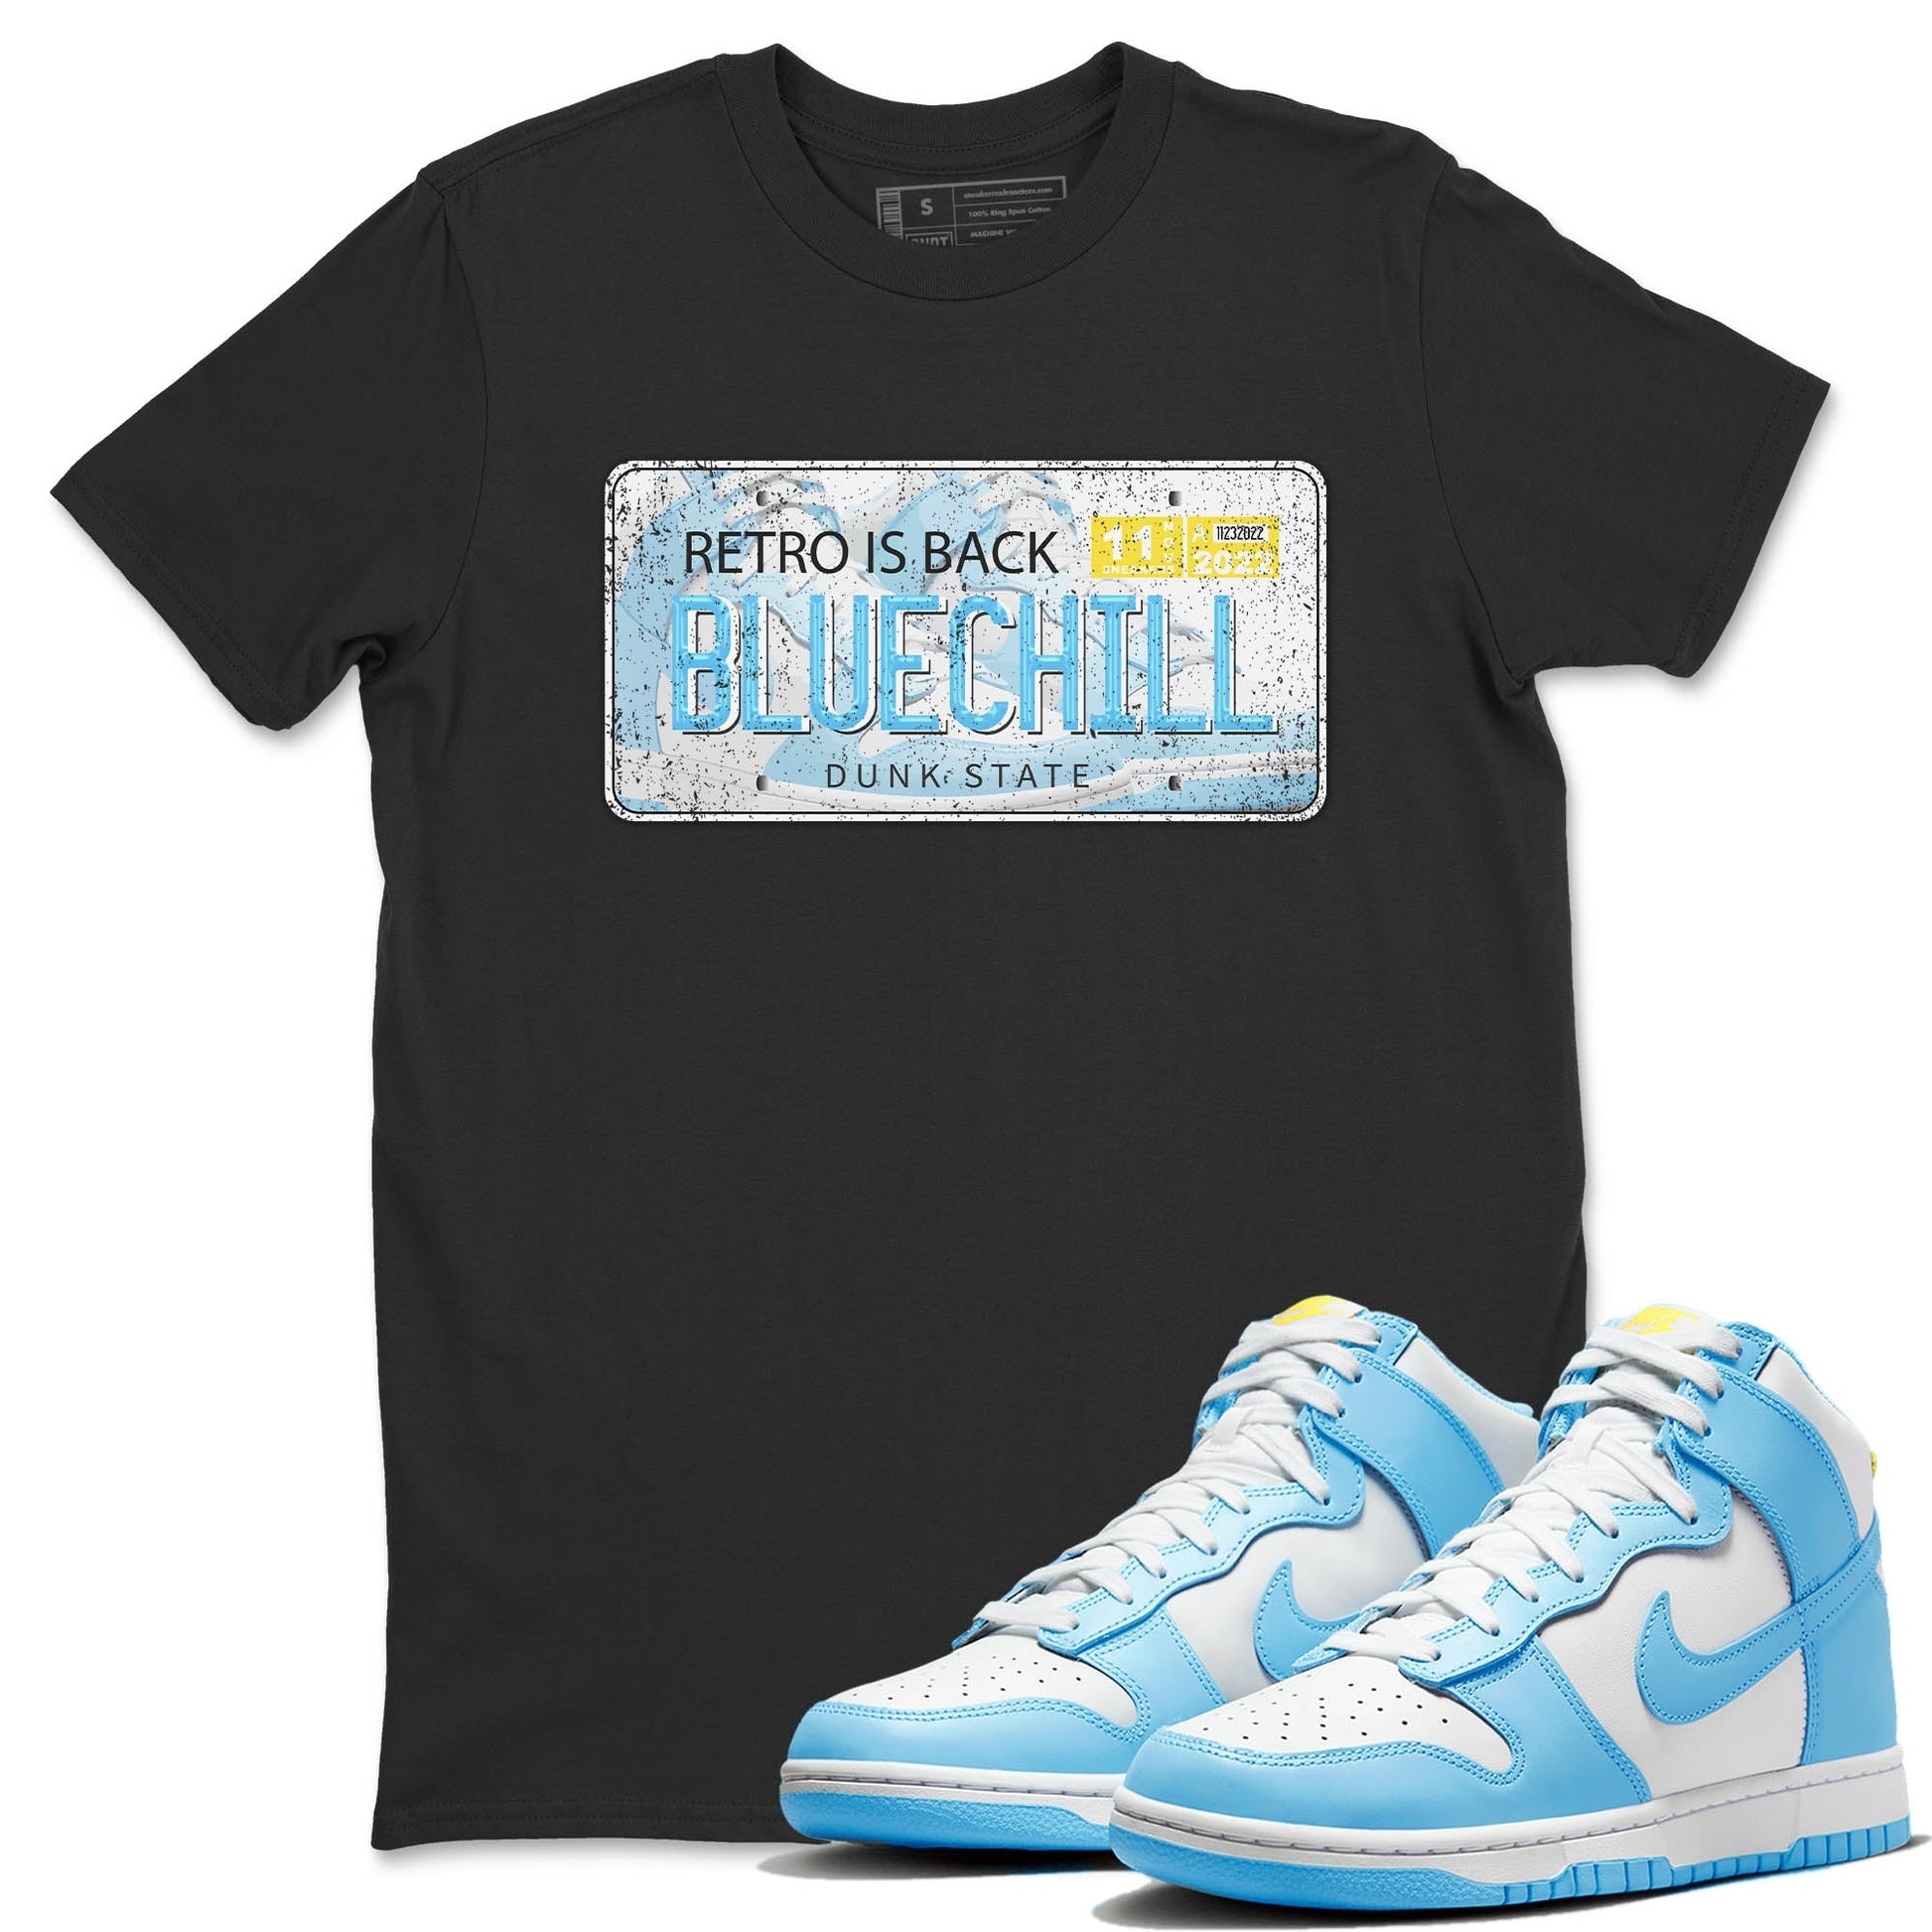 Nike Dunk High Blue Chill Sneaker Match Tees Jordan Plate Sneaker Tees Nike Dunk High Blue Chill Sneaker Release Tees Unisex Shirts